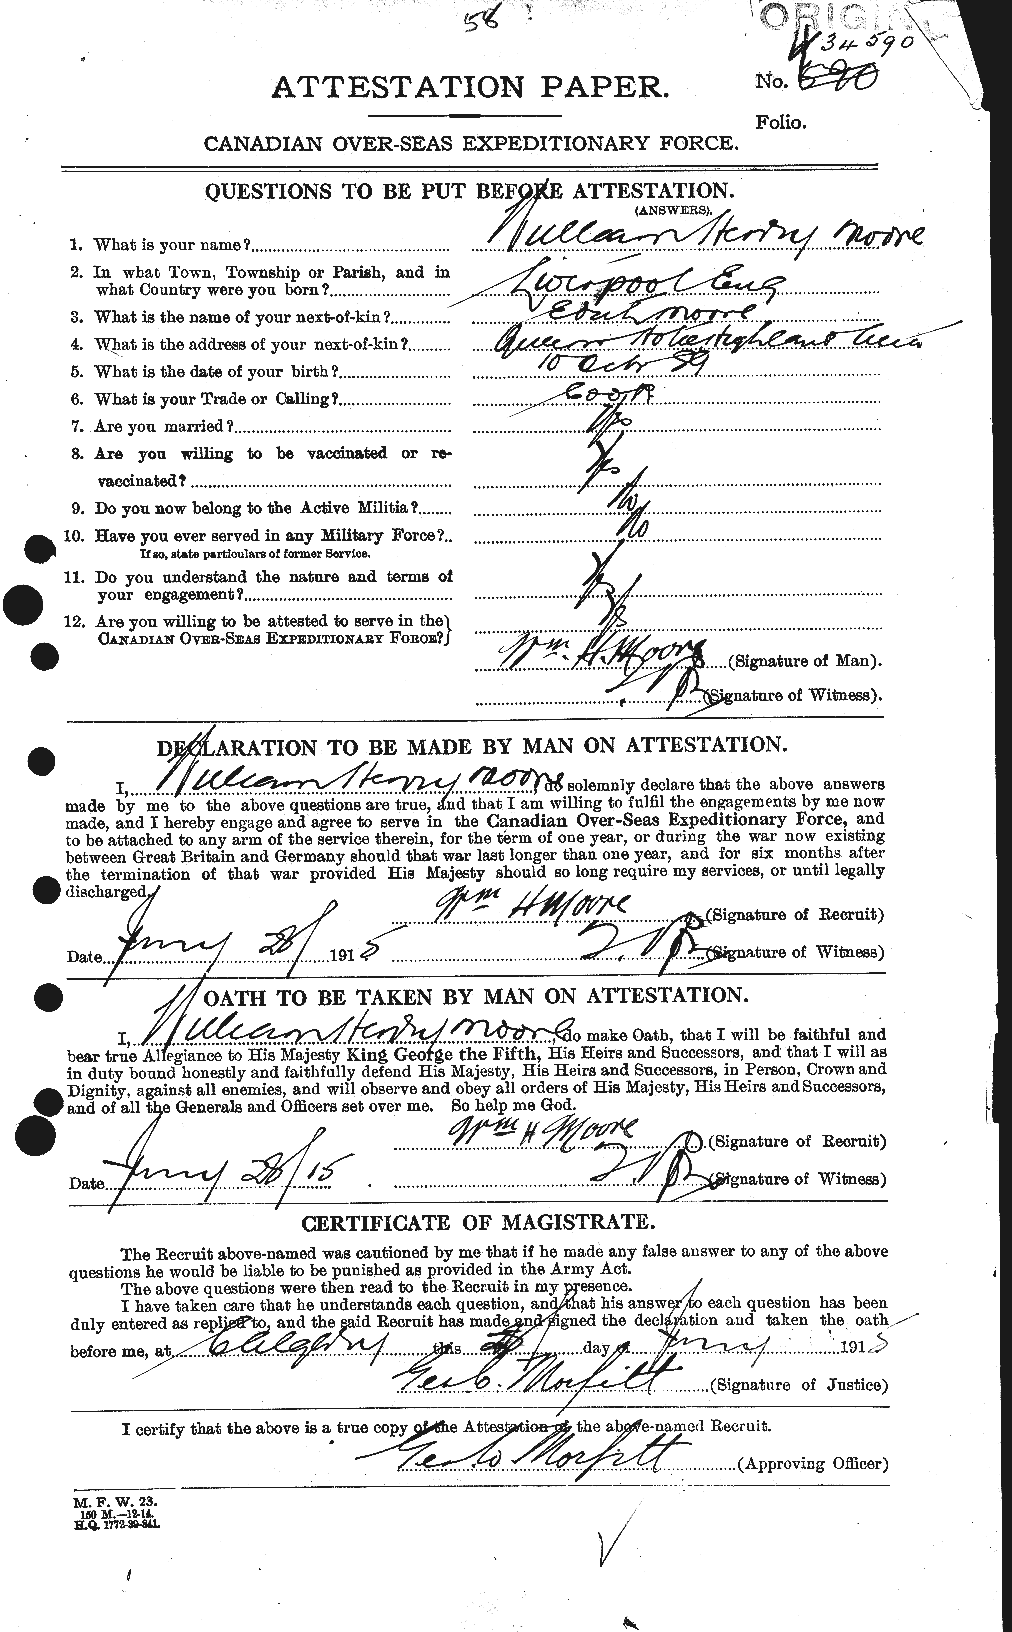 Personnel Records of the First World War - CEF 505822a